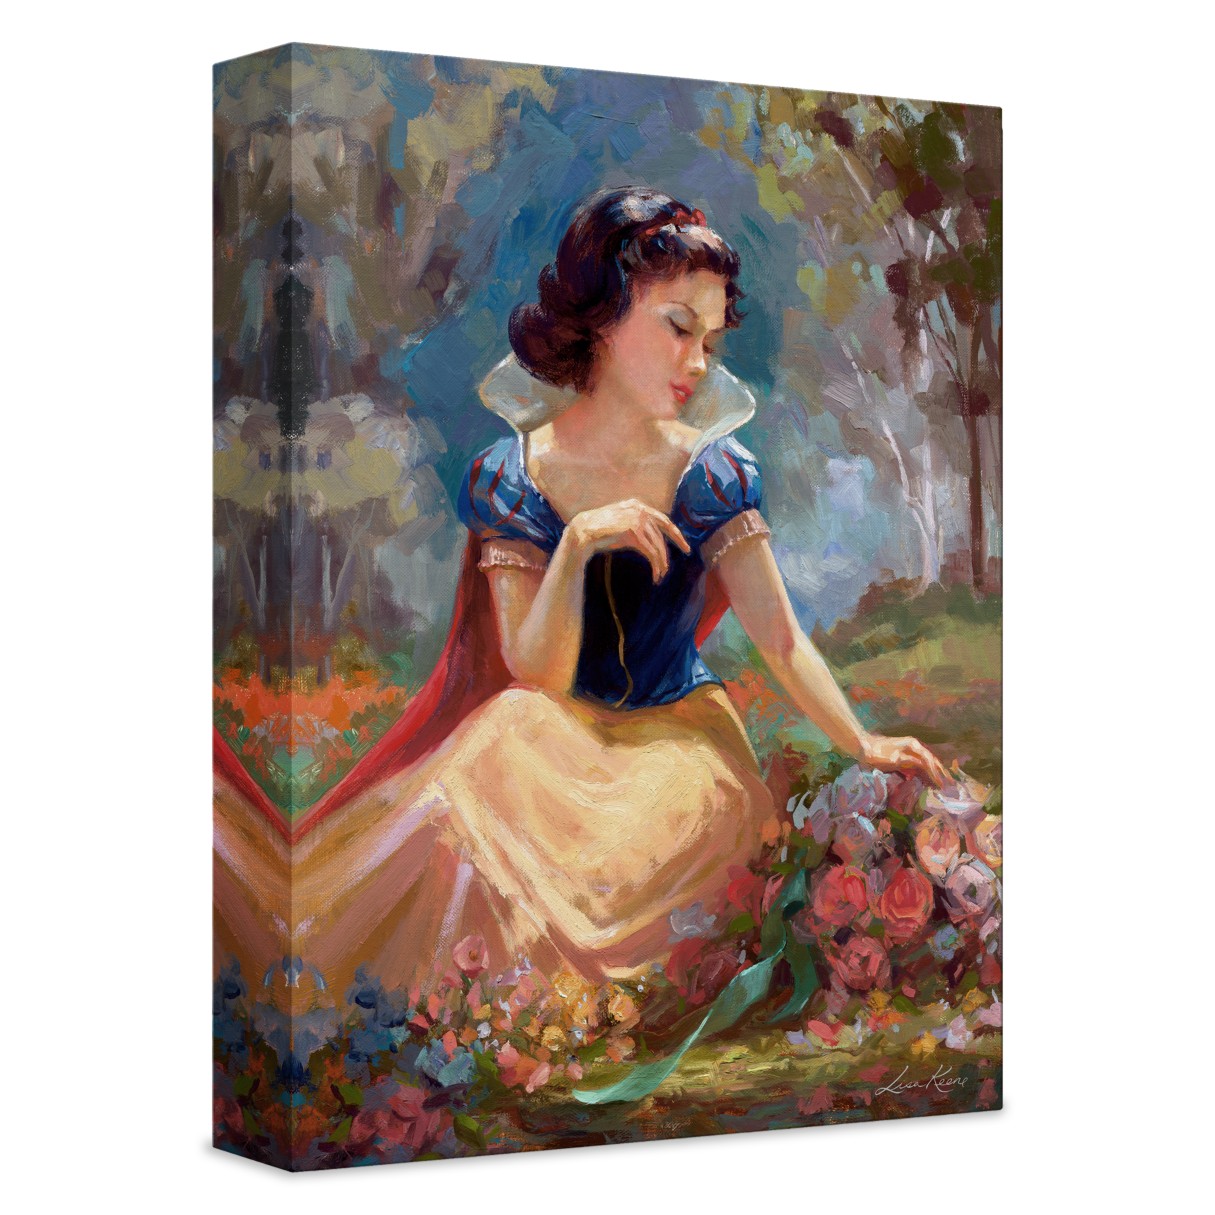 ''Gathering Flowers'' Giclée on Canvas by Lisa Keene – Limited Edition